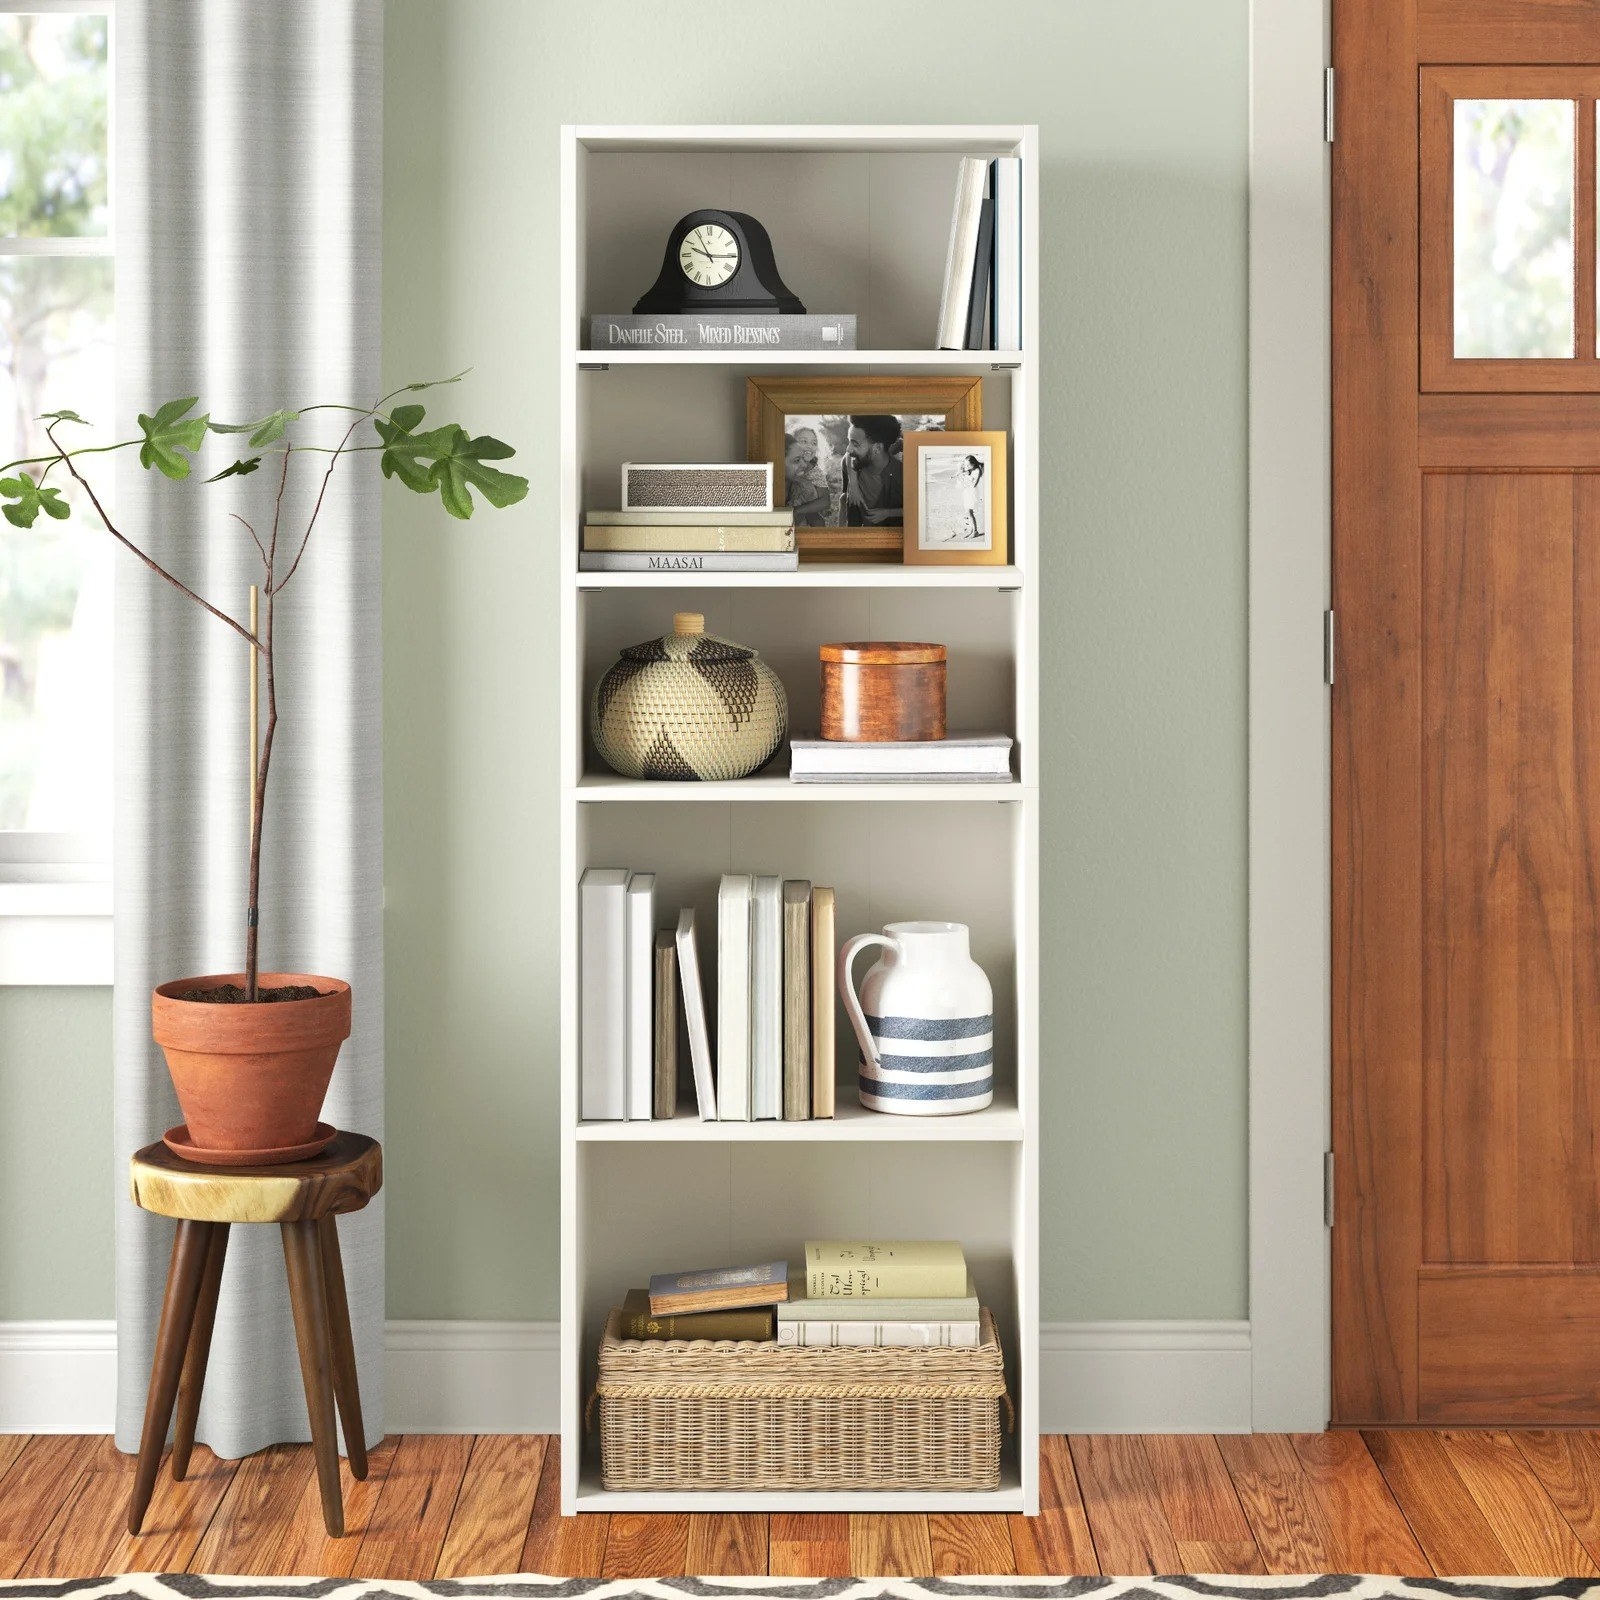 White bookcase in a living room next to a stool